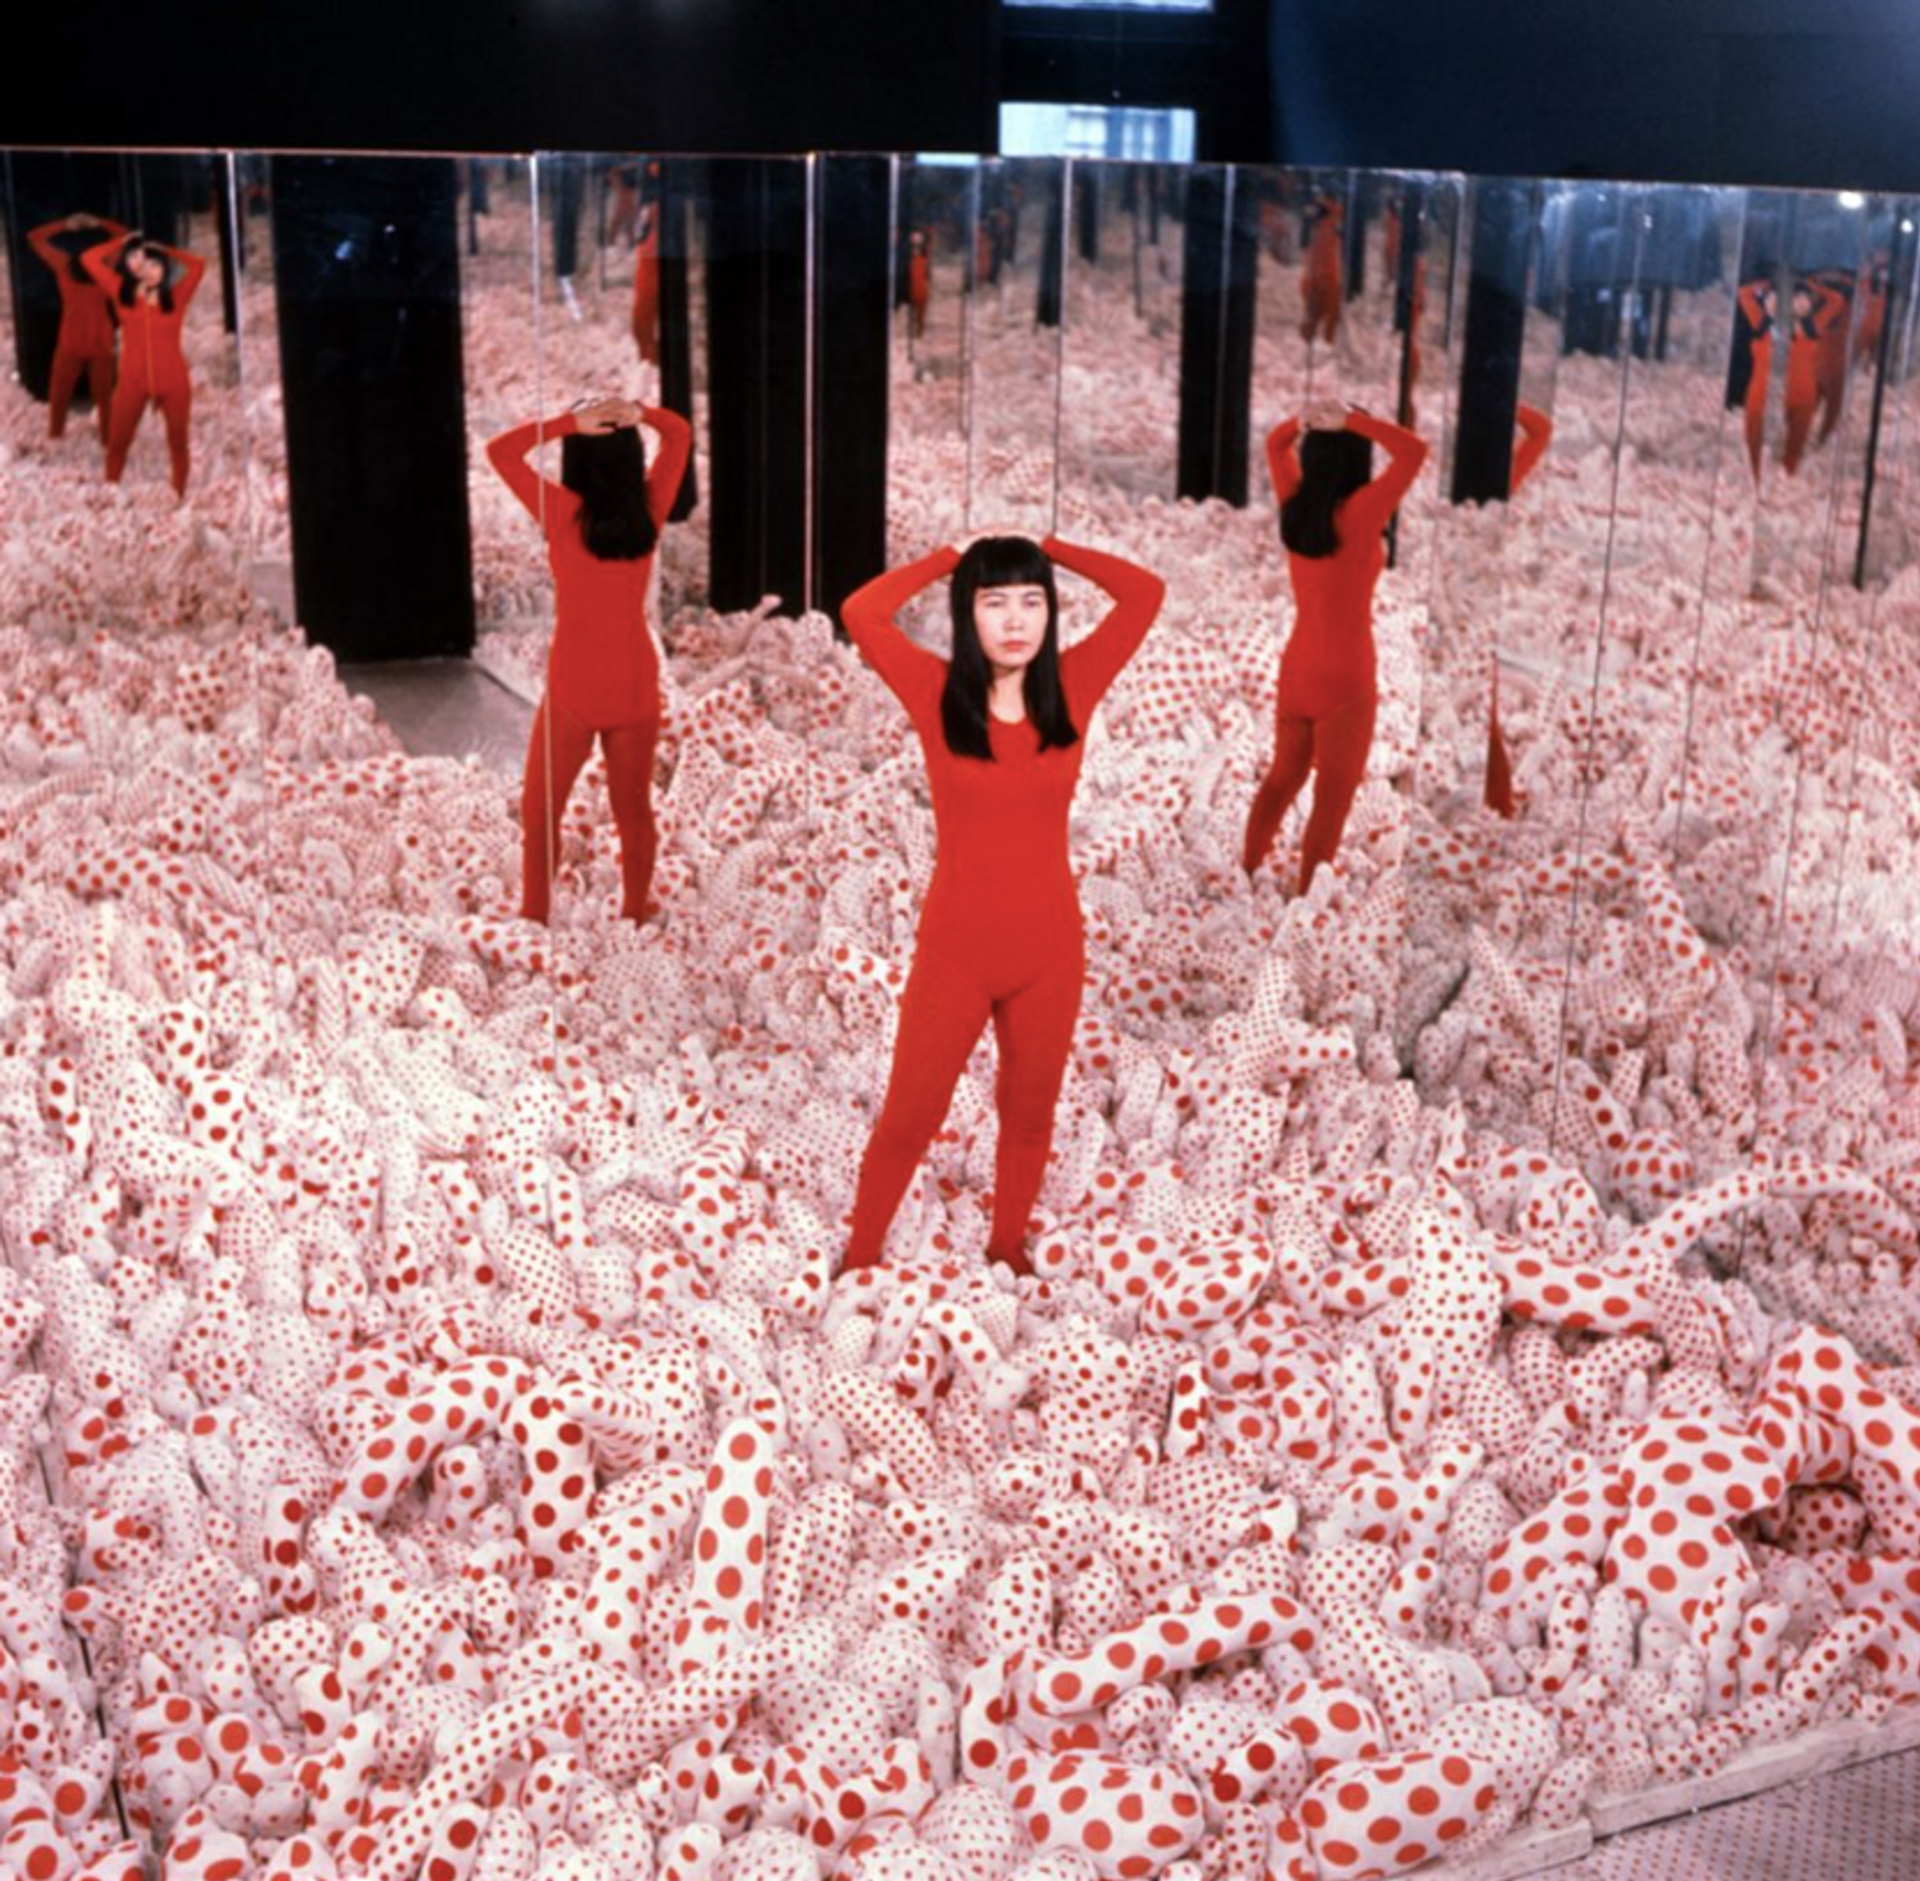 An installation artwork titled "Infinity Mirror Rooms" by Yayoi Kusama, featuring small rooms lined with mirrors, creating an infinite reflection of lights and shapes. Visitors immerse themselves in the kaleidoscopic experience.